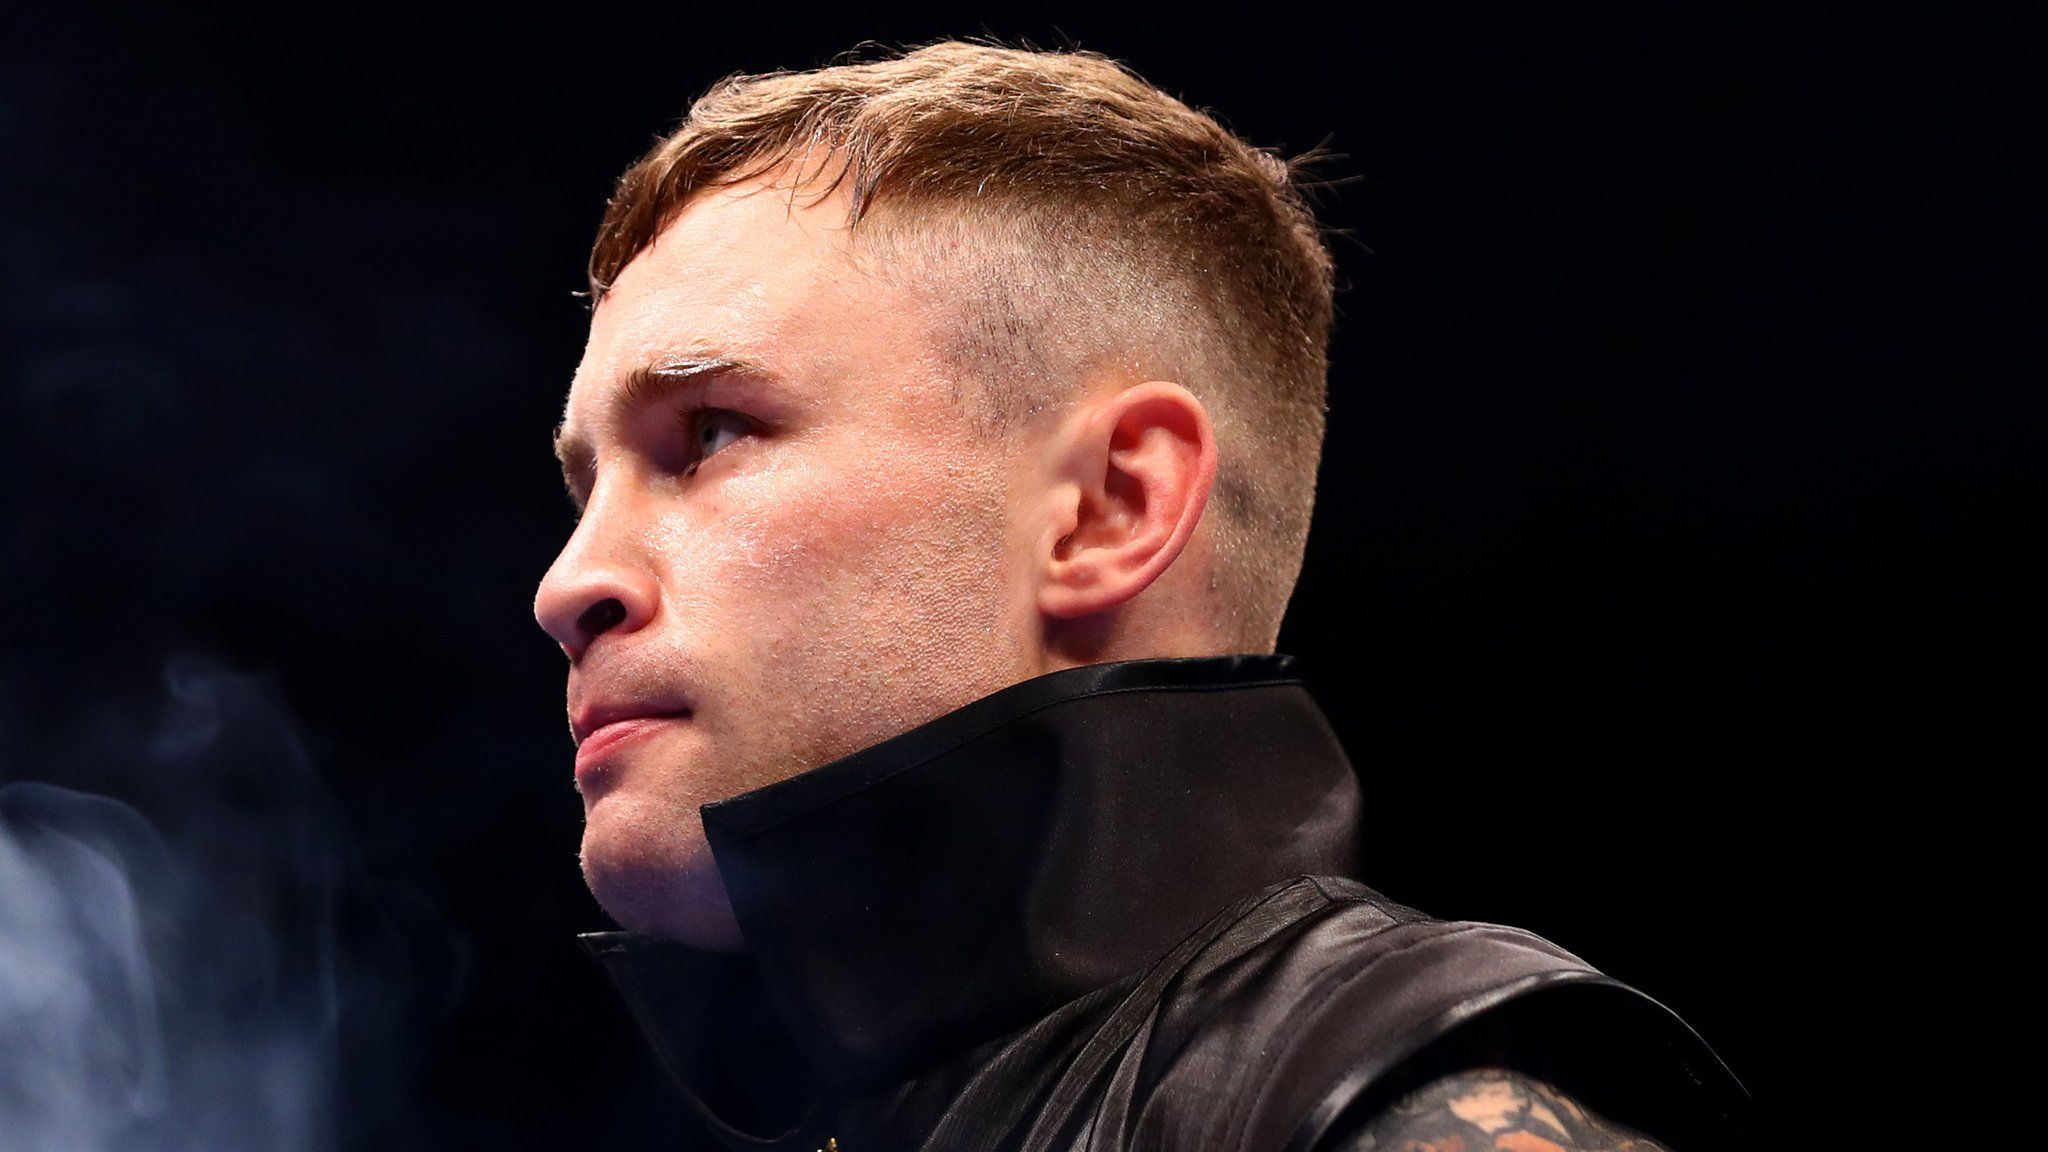 Carl Frampton pictured ahead of his last professional bout against Jamel Herring